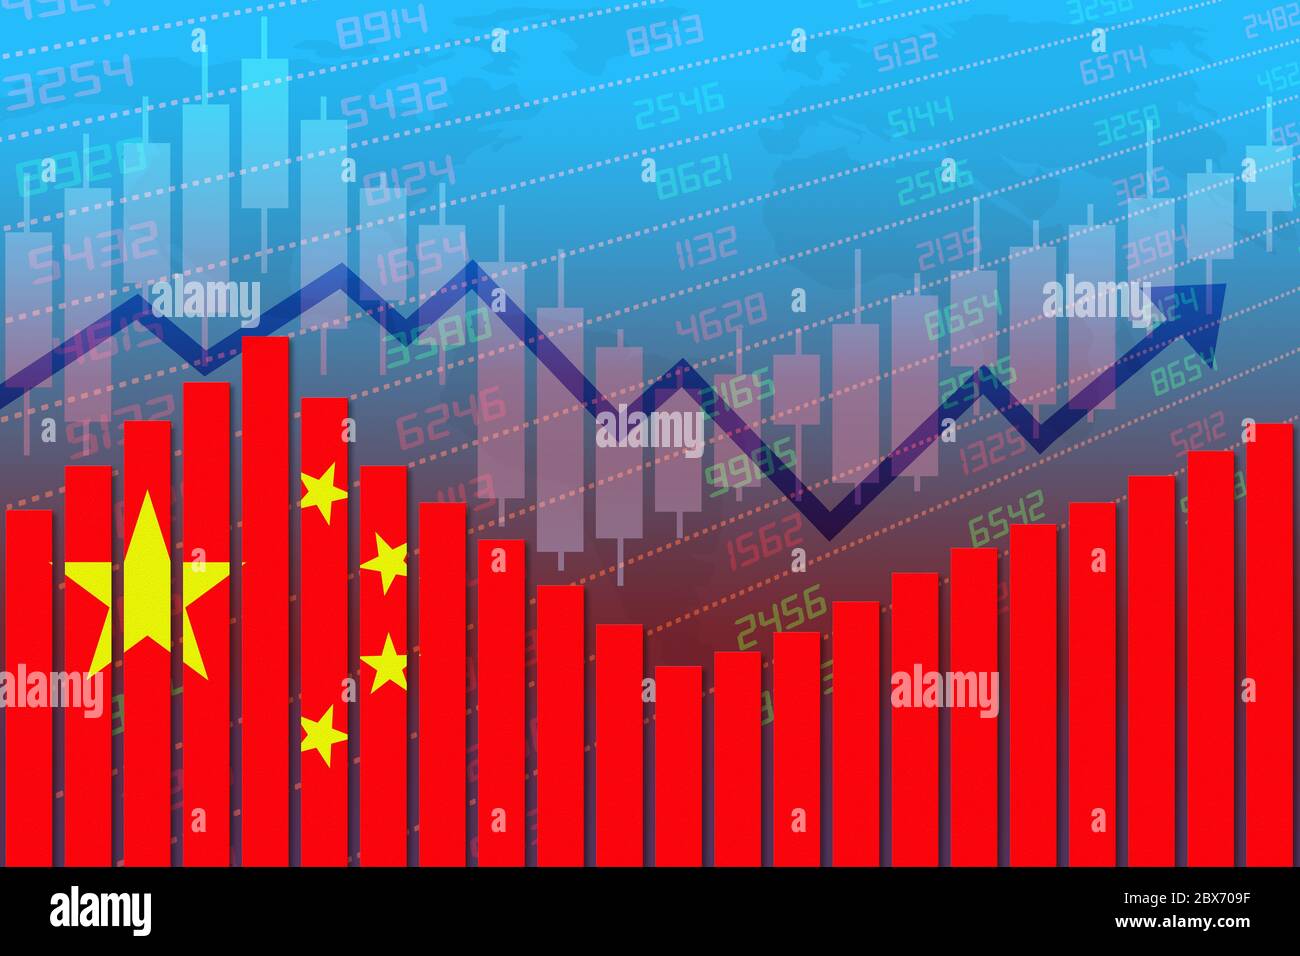 China flag on bar chart concept of economic recovery and business improving after crisis such as Covid-19 or other catastrophe as economy and business Stock Photo